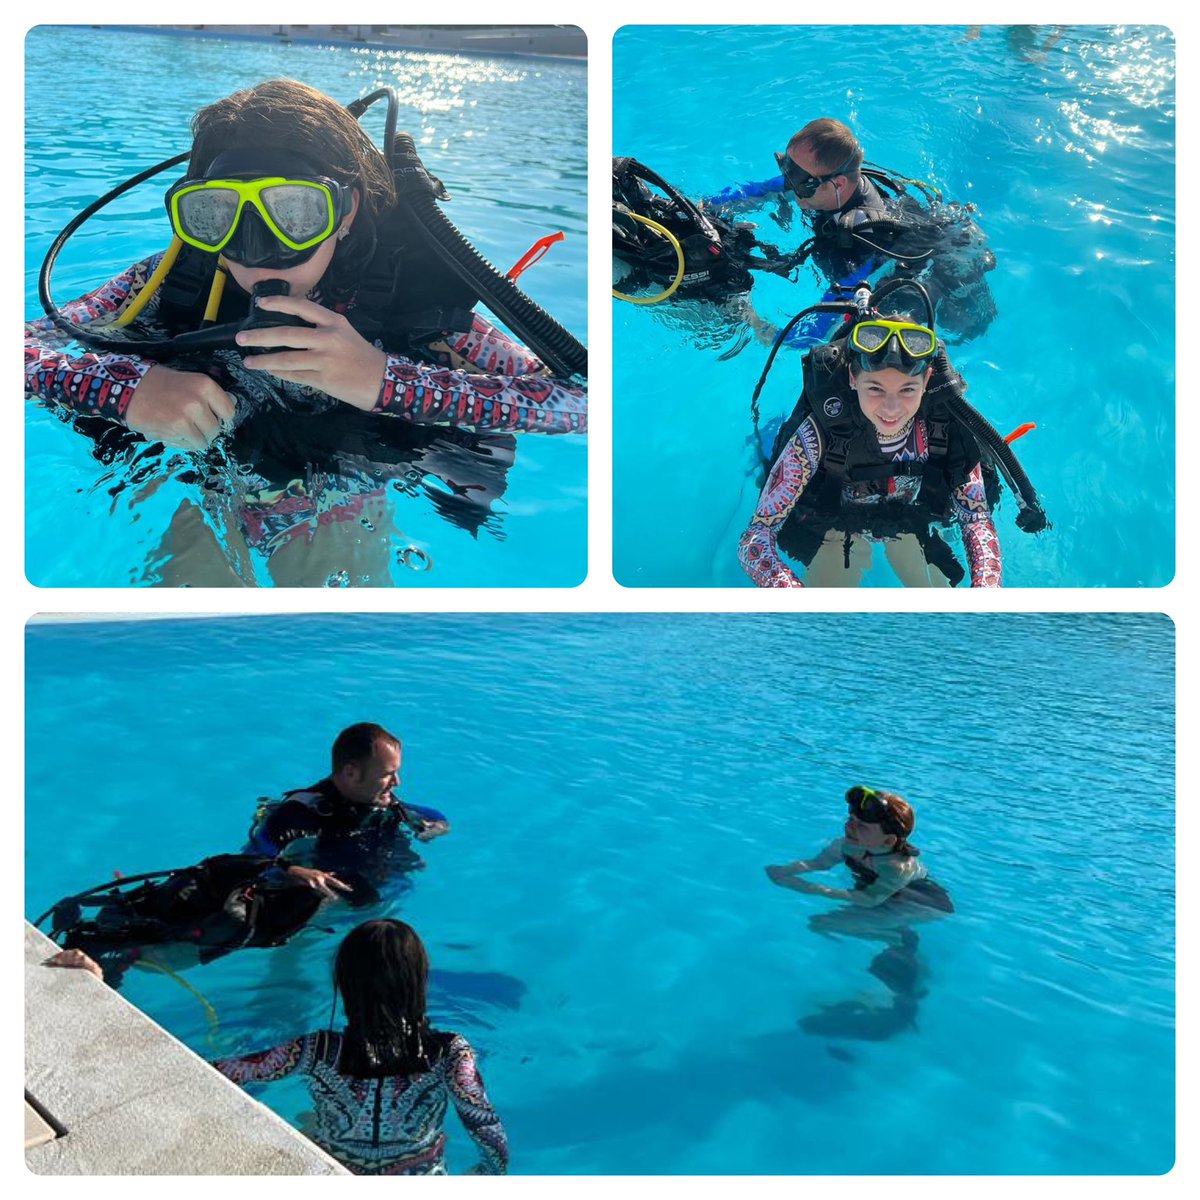 ‼️DON’T MISS IT‼️

💦 What: Free scuba diving try out 😎
🕒 When: Tomorrow from 3pm to 4pm 👏🏻
⛱️ Where: SEA SOUL Huatulco club 🌞

See you tomorrow!
(special Club entrance $200MXN)

#huatulcodivecenter #HDC #divehuatulco #divemexico #padi #paditv #freescubatryout